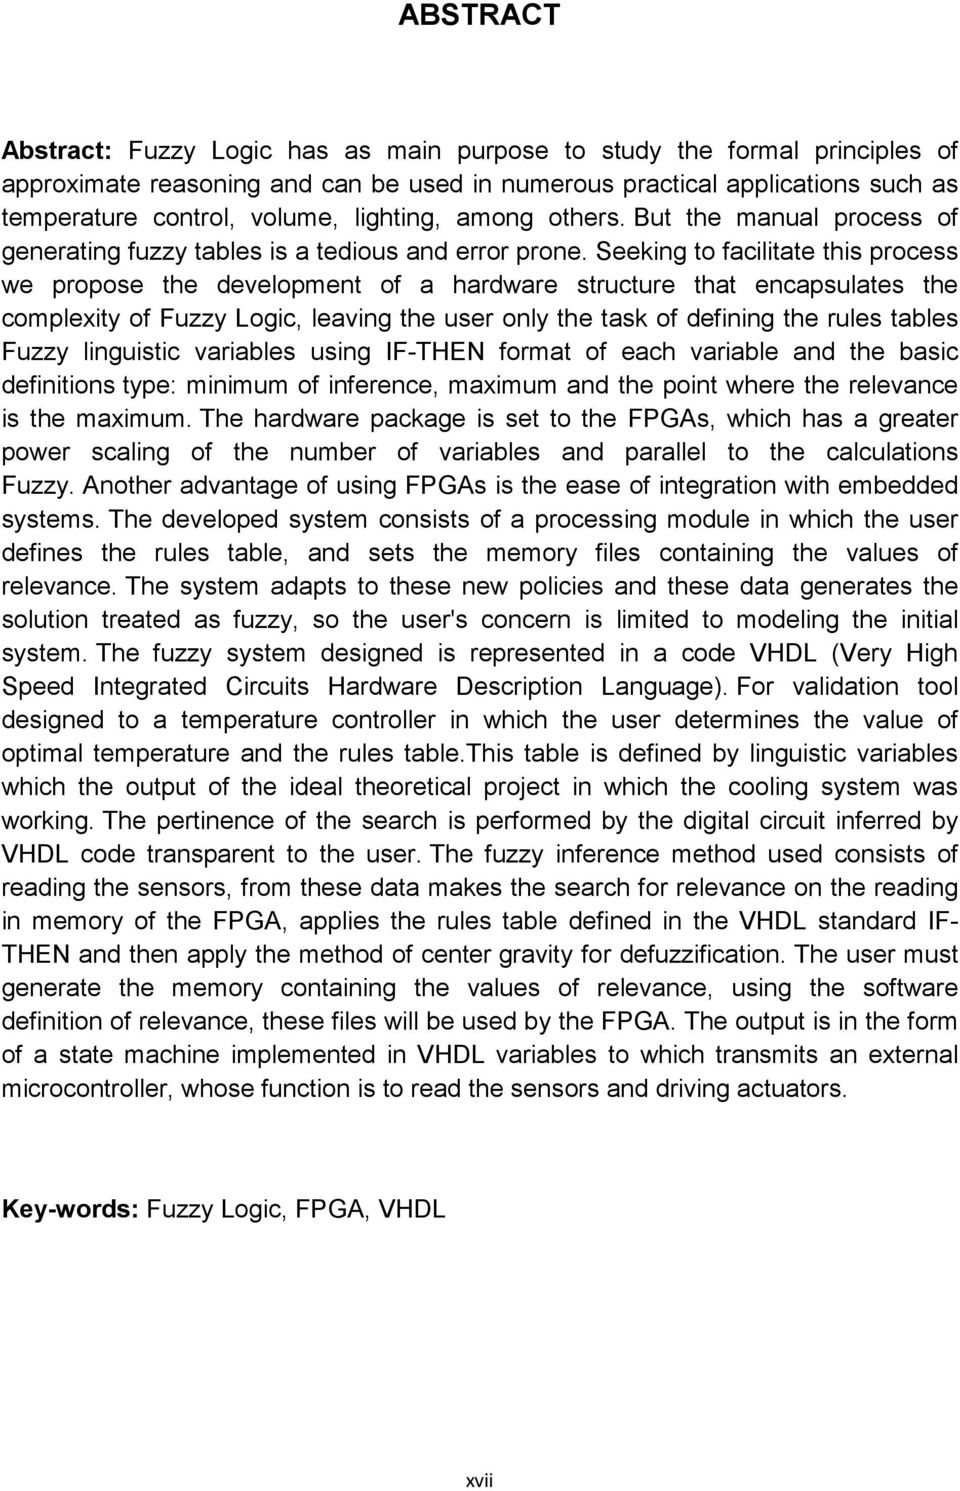 Seeking to facilitate this process we propose the development of a hardware structure that encapsulates the complexity of Fuzzy Logic, leaving the user only the task of defining the rules tables